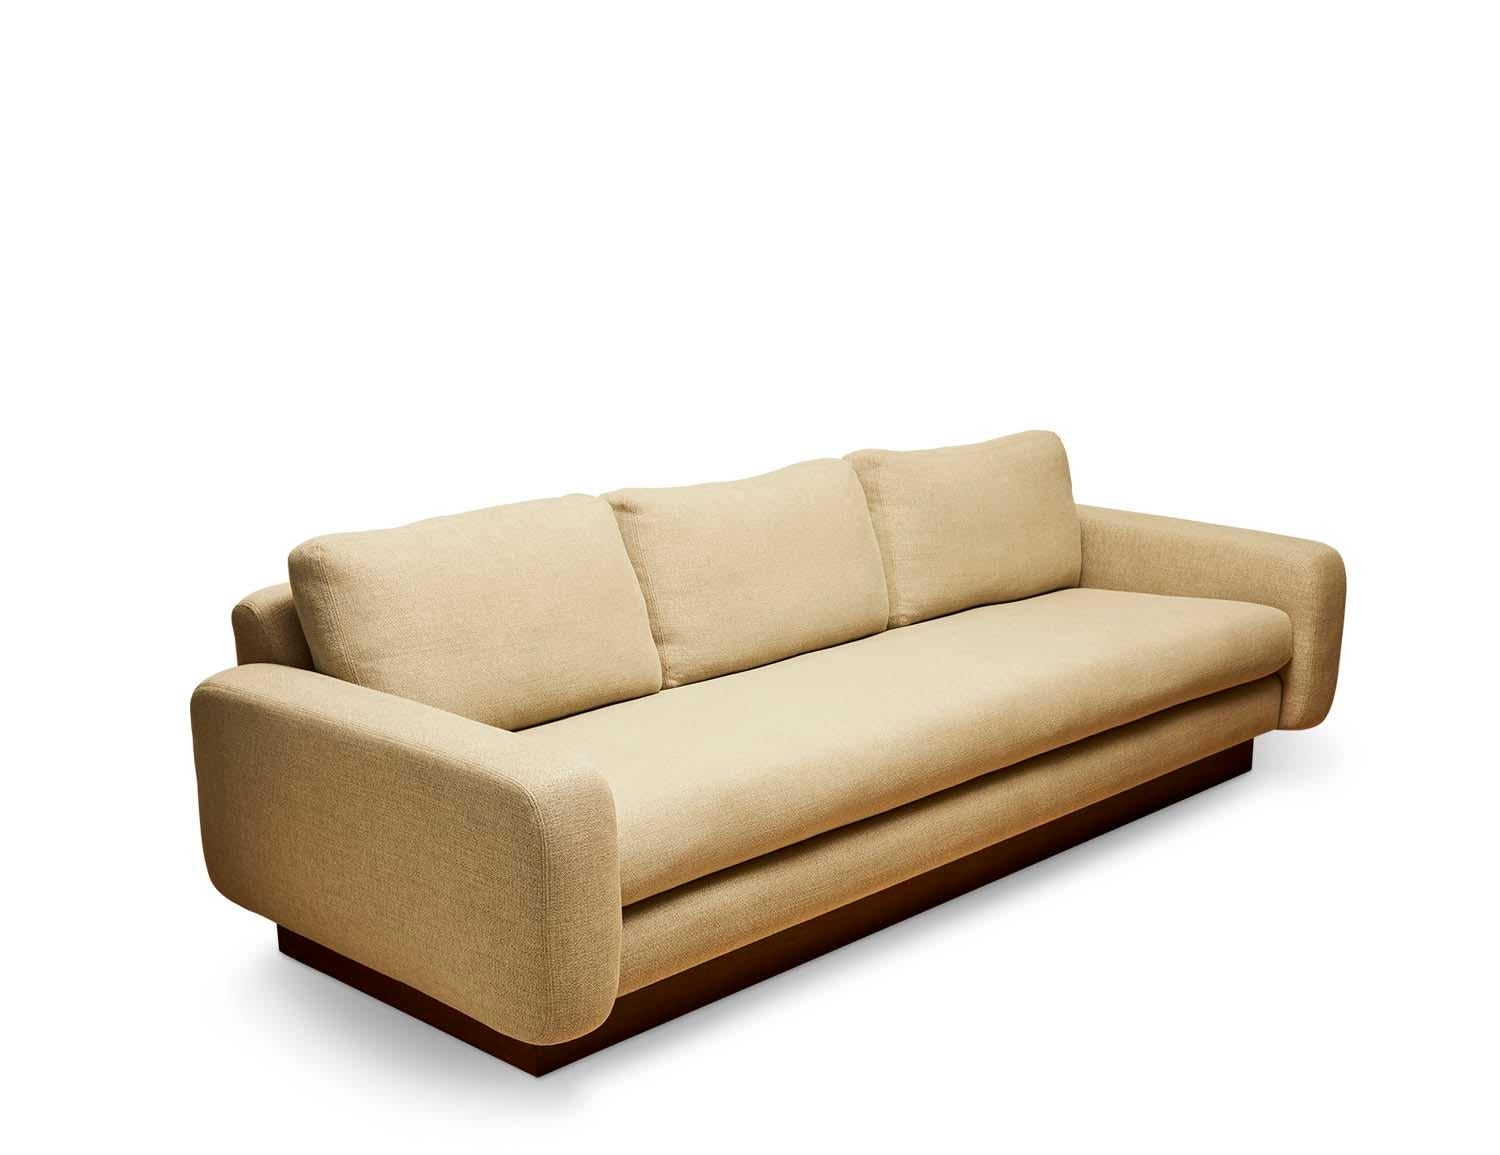 The Mesa sofa is a fully upholstered sofa that features a walnut or oak plinth base.

The Lawson-Fenning Collection is designed and handmade in Los Angeles, California.
Message us to find out which finishes are currently in stock.